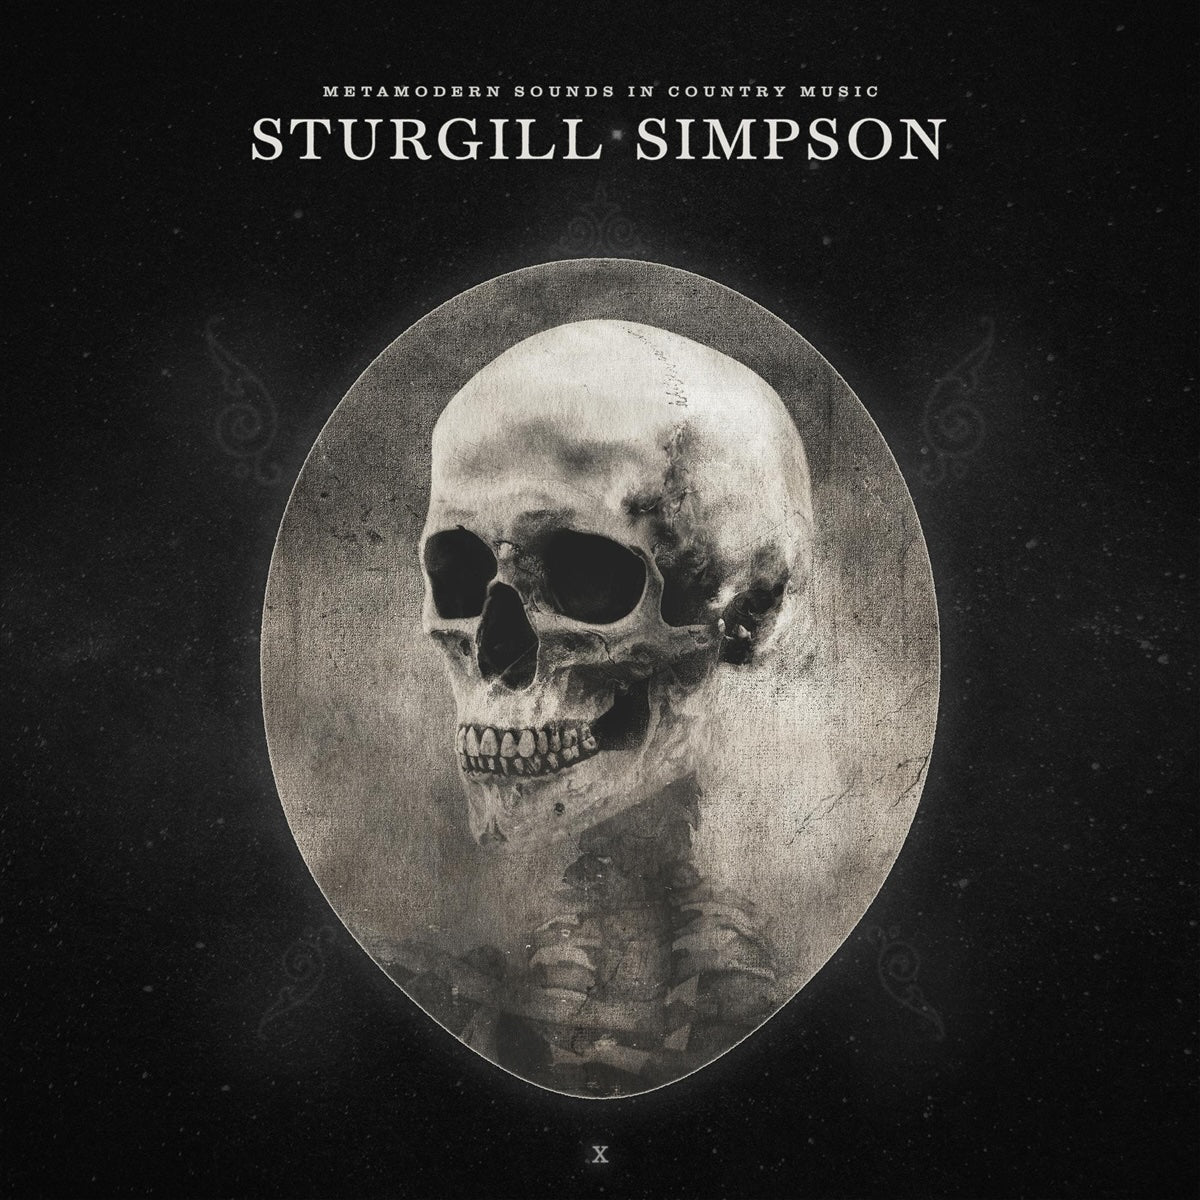 Sturgill Simpson - Metamodern Sounds In Country Music (10th Anniversary Edition)